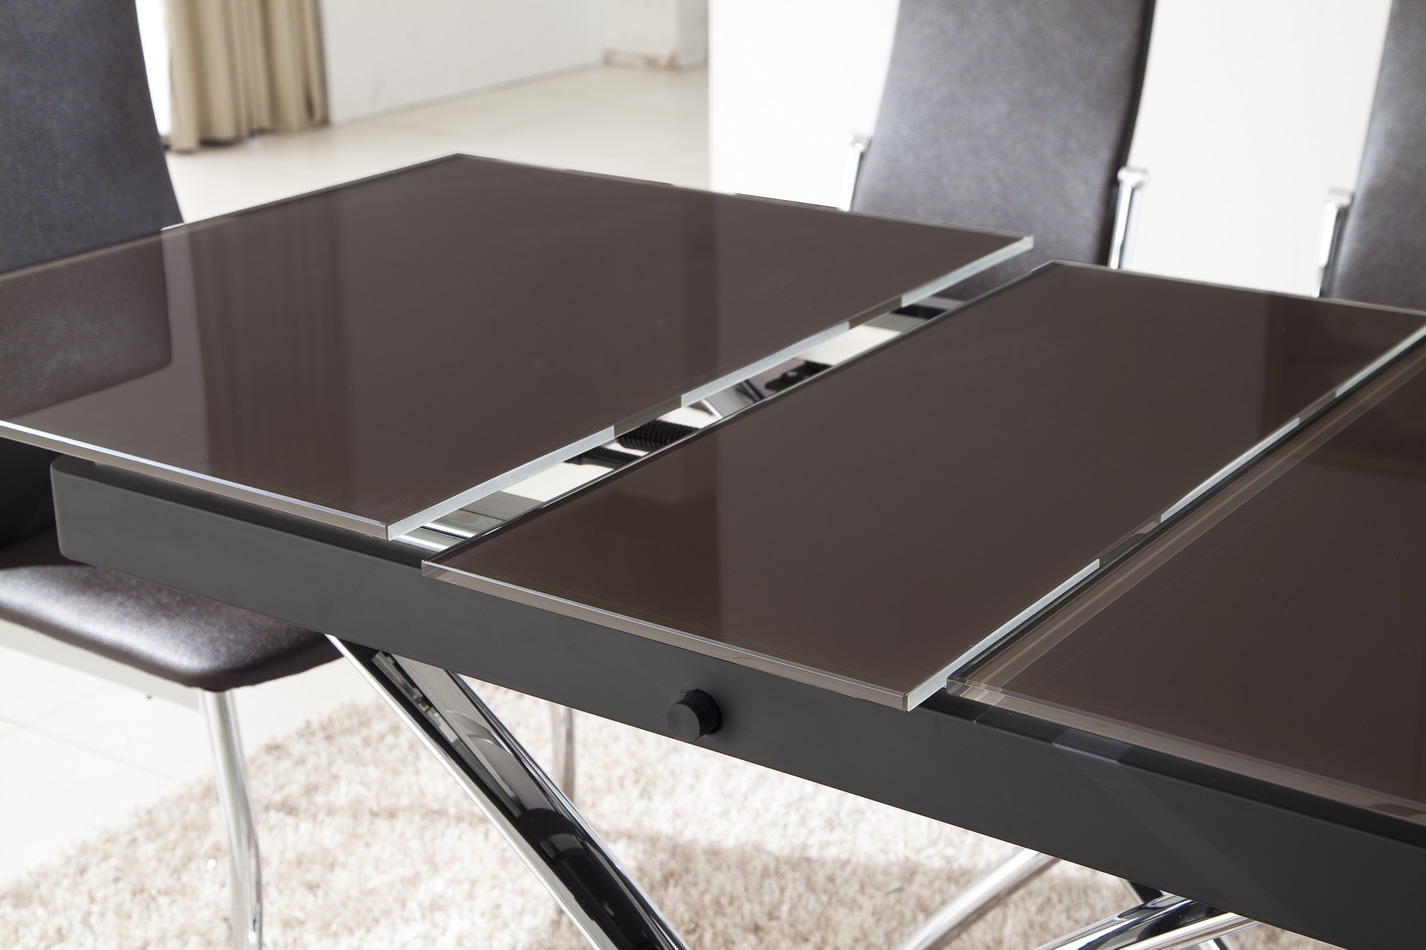 Large table - transformer for a living room with white furniture